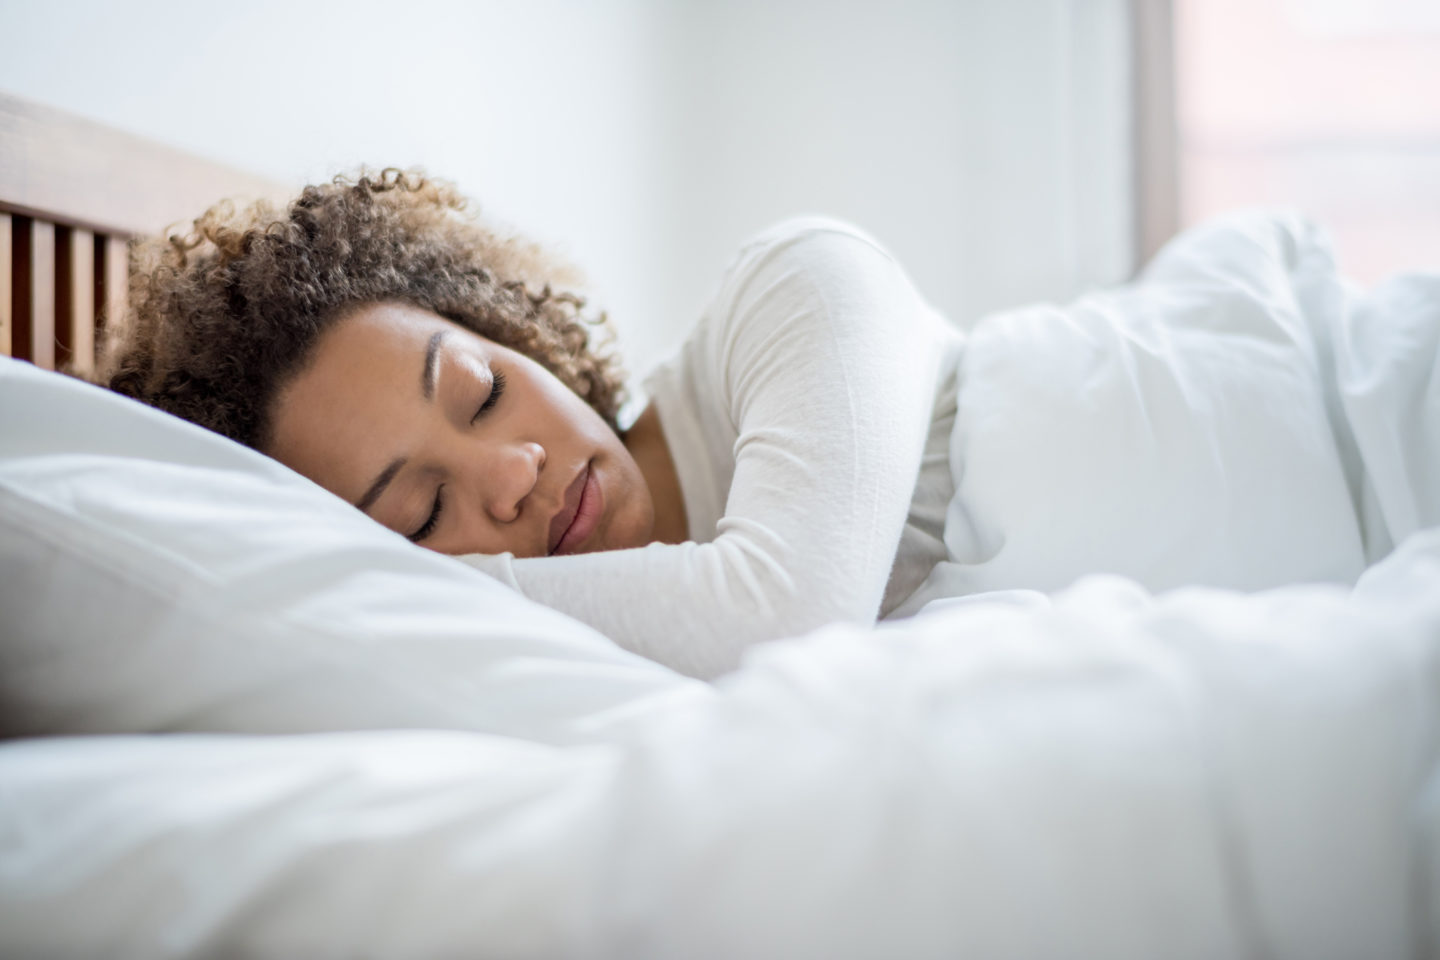 The Bottom Line: Should You Should Be Going Commando in Your Sleep?